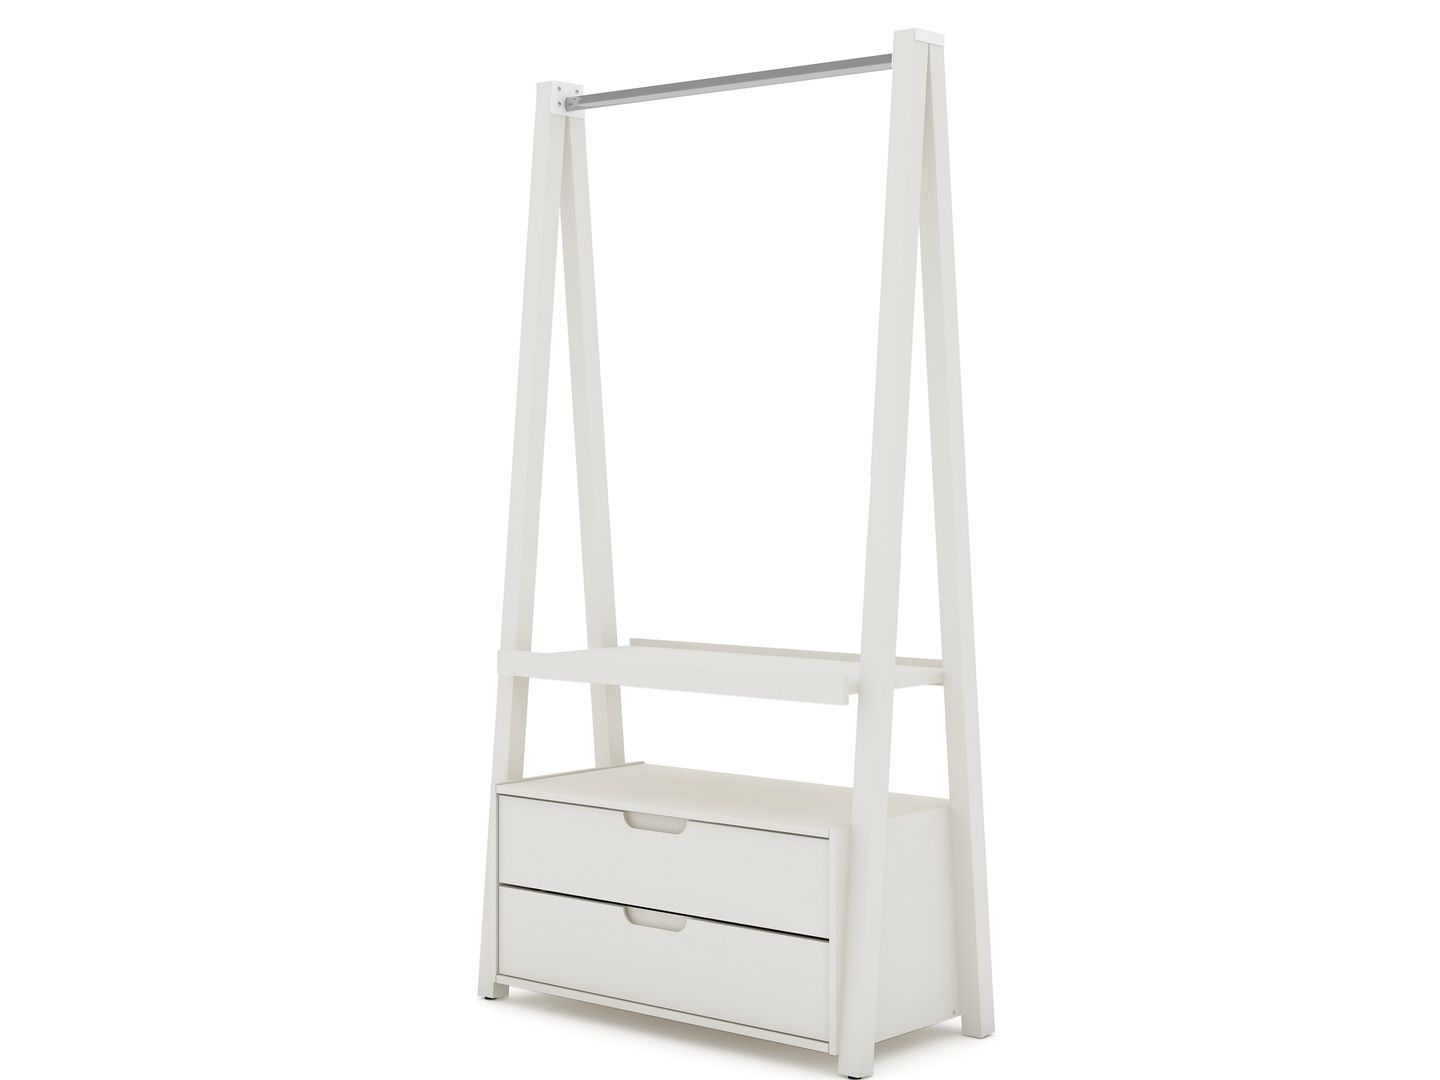 Manhattan Comfort Rockefeller Mid-Century - Modern Open Wardrobe Armoire Closet with 2 Drawers in Off White and Nature